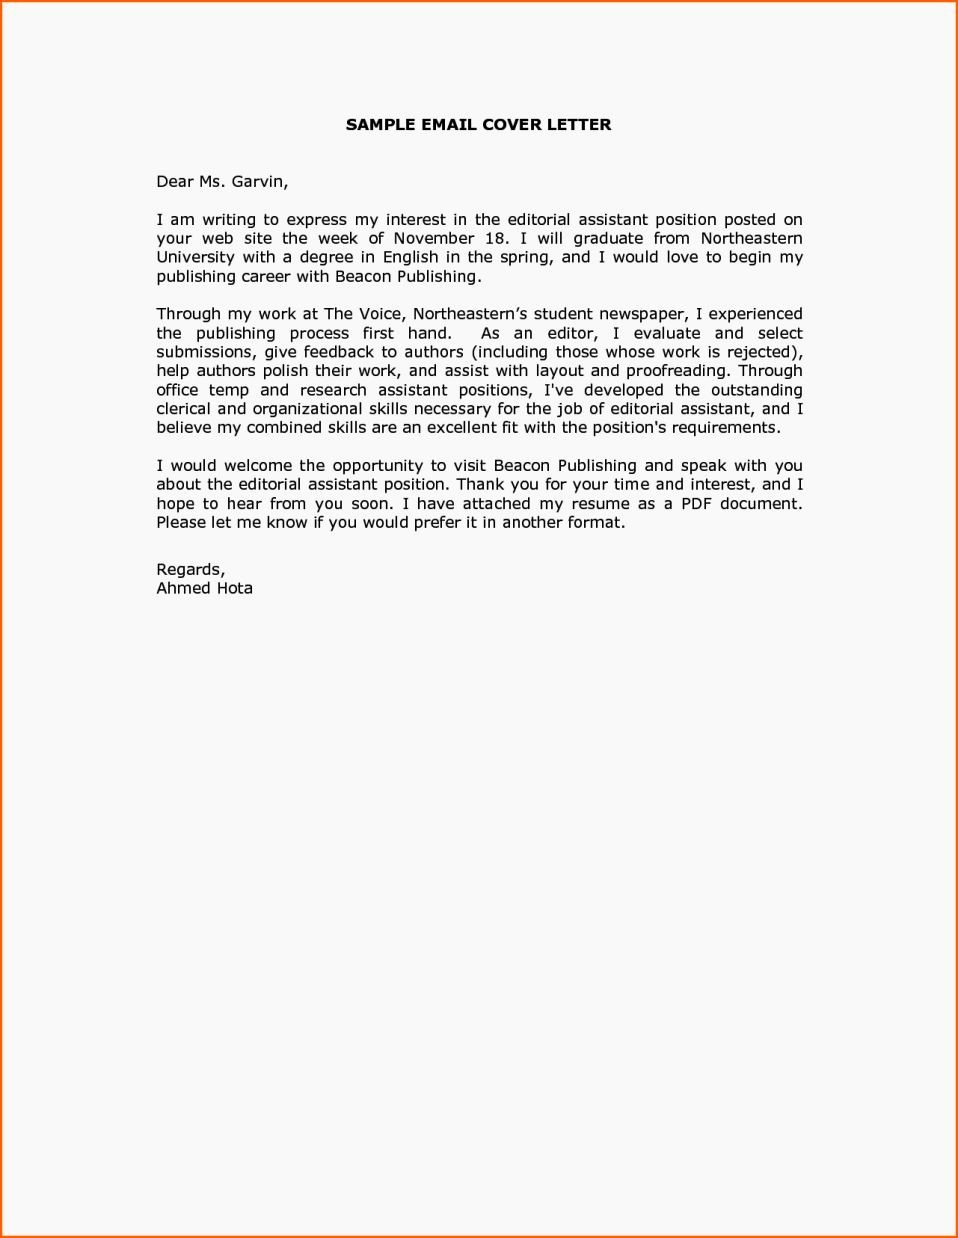 Sample Resume and Cover Letter Awesome Cover Letter Sample Email Message